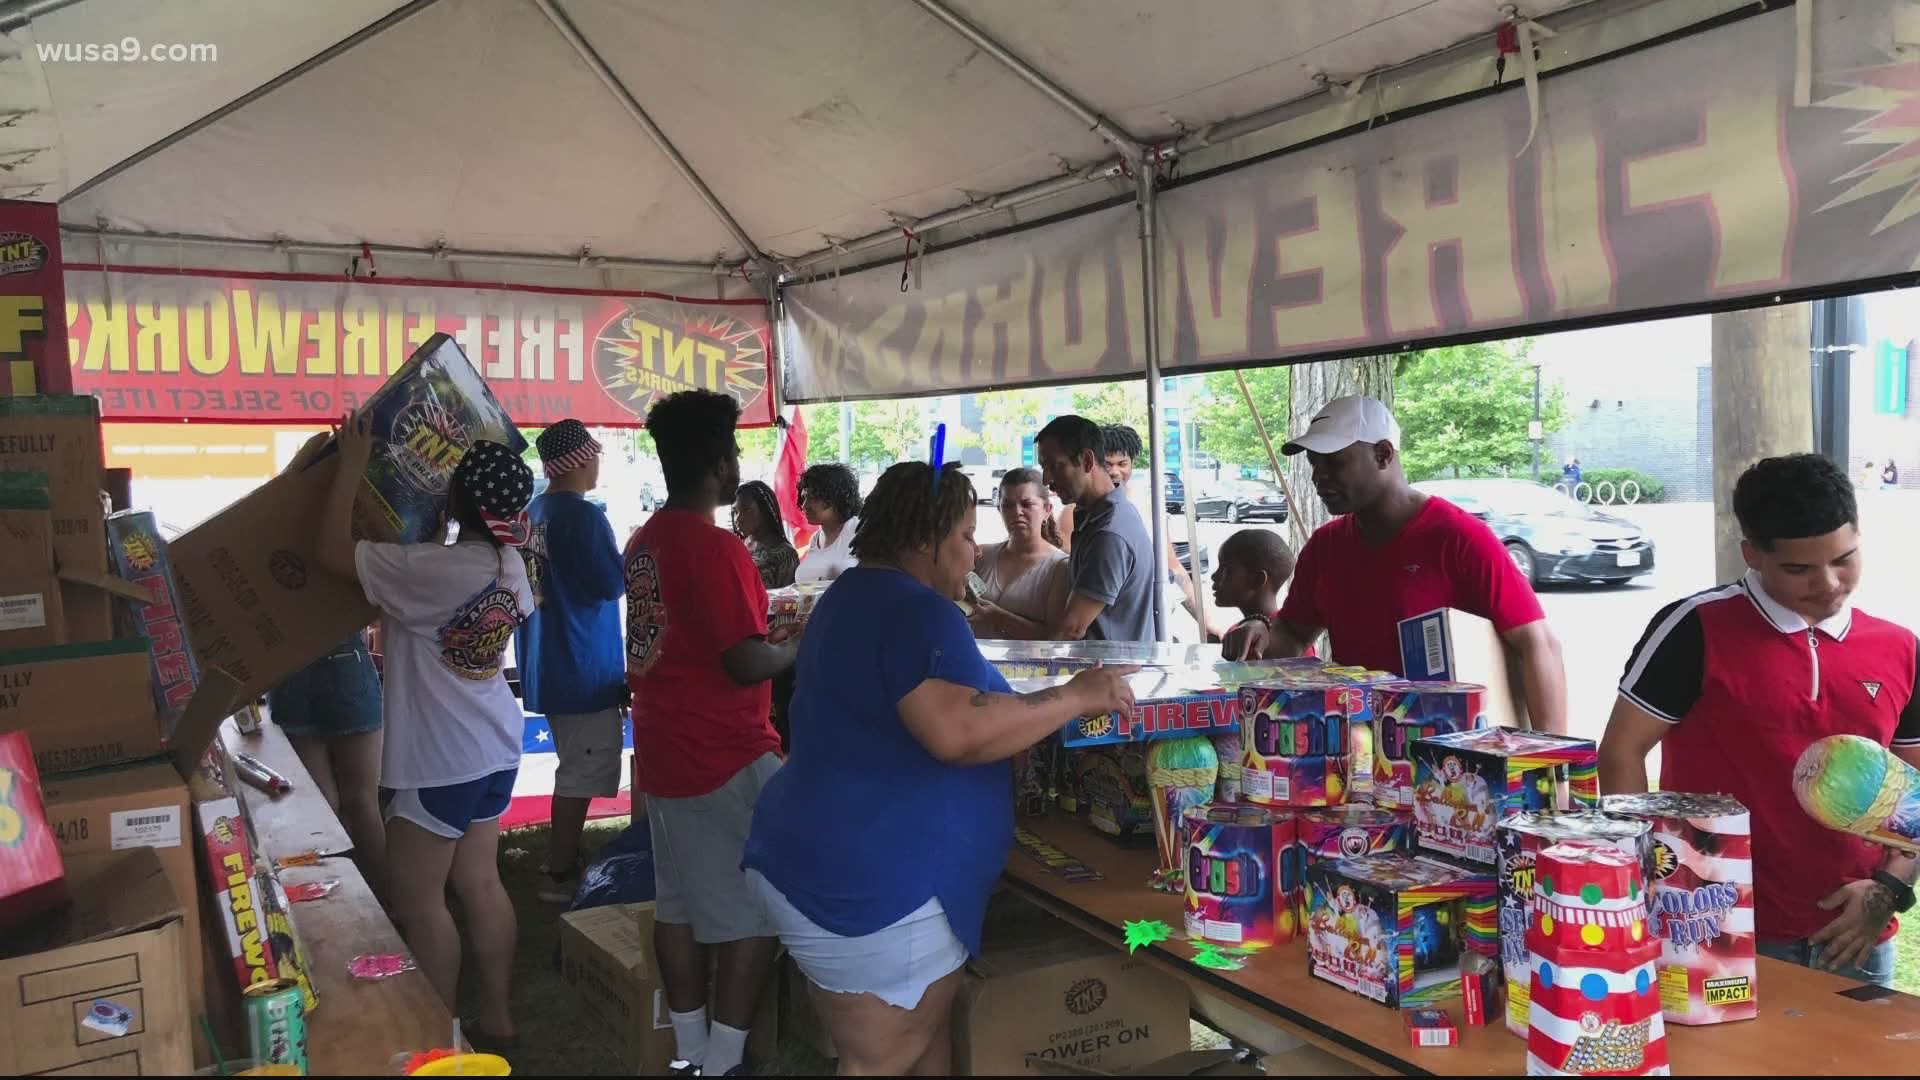 DCRA denied Capitol Works' license to sell fireworks due to "health emergency and demonstrations." Owner James Peters says it's a case of discrimination.